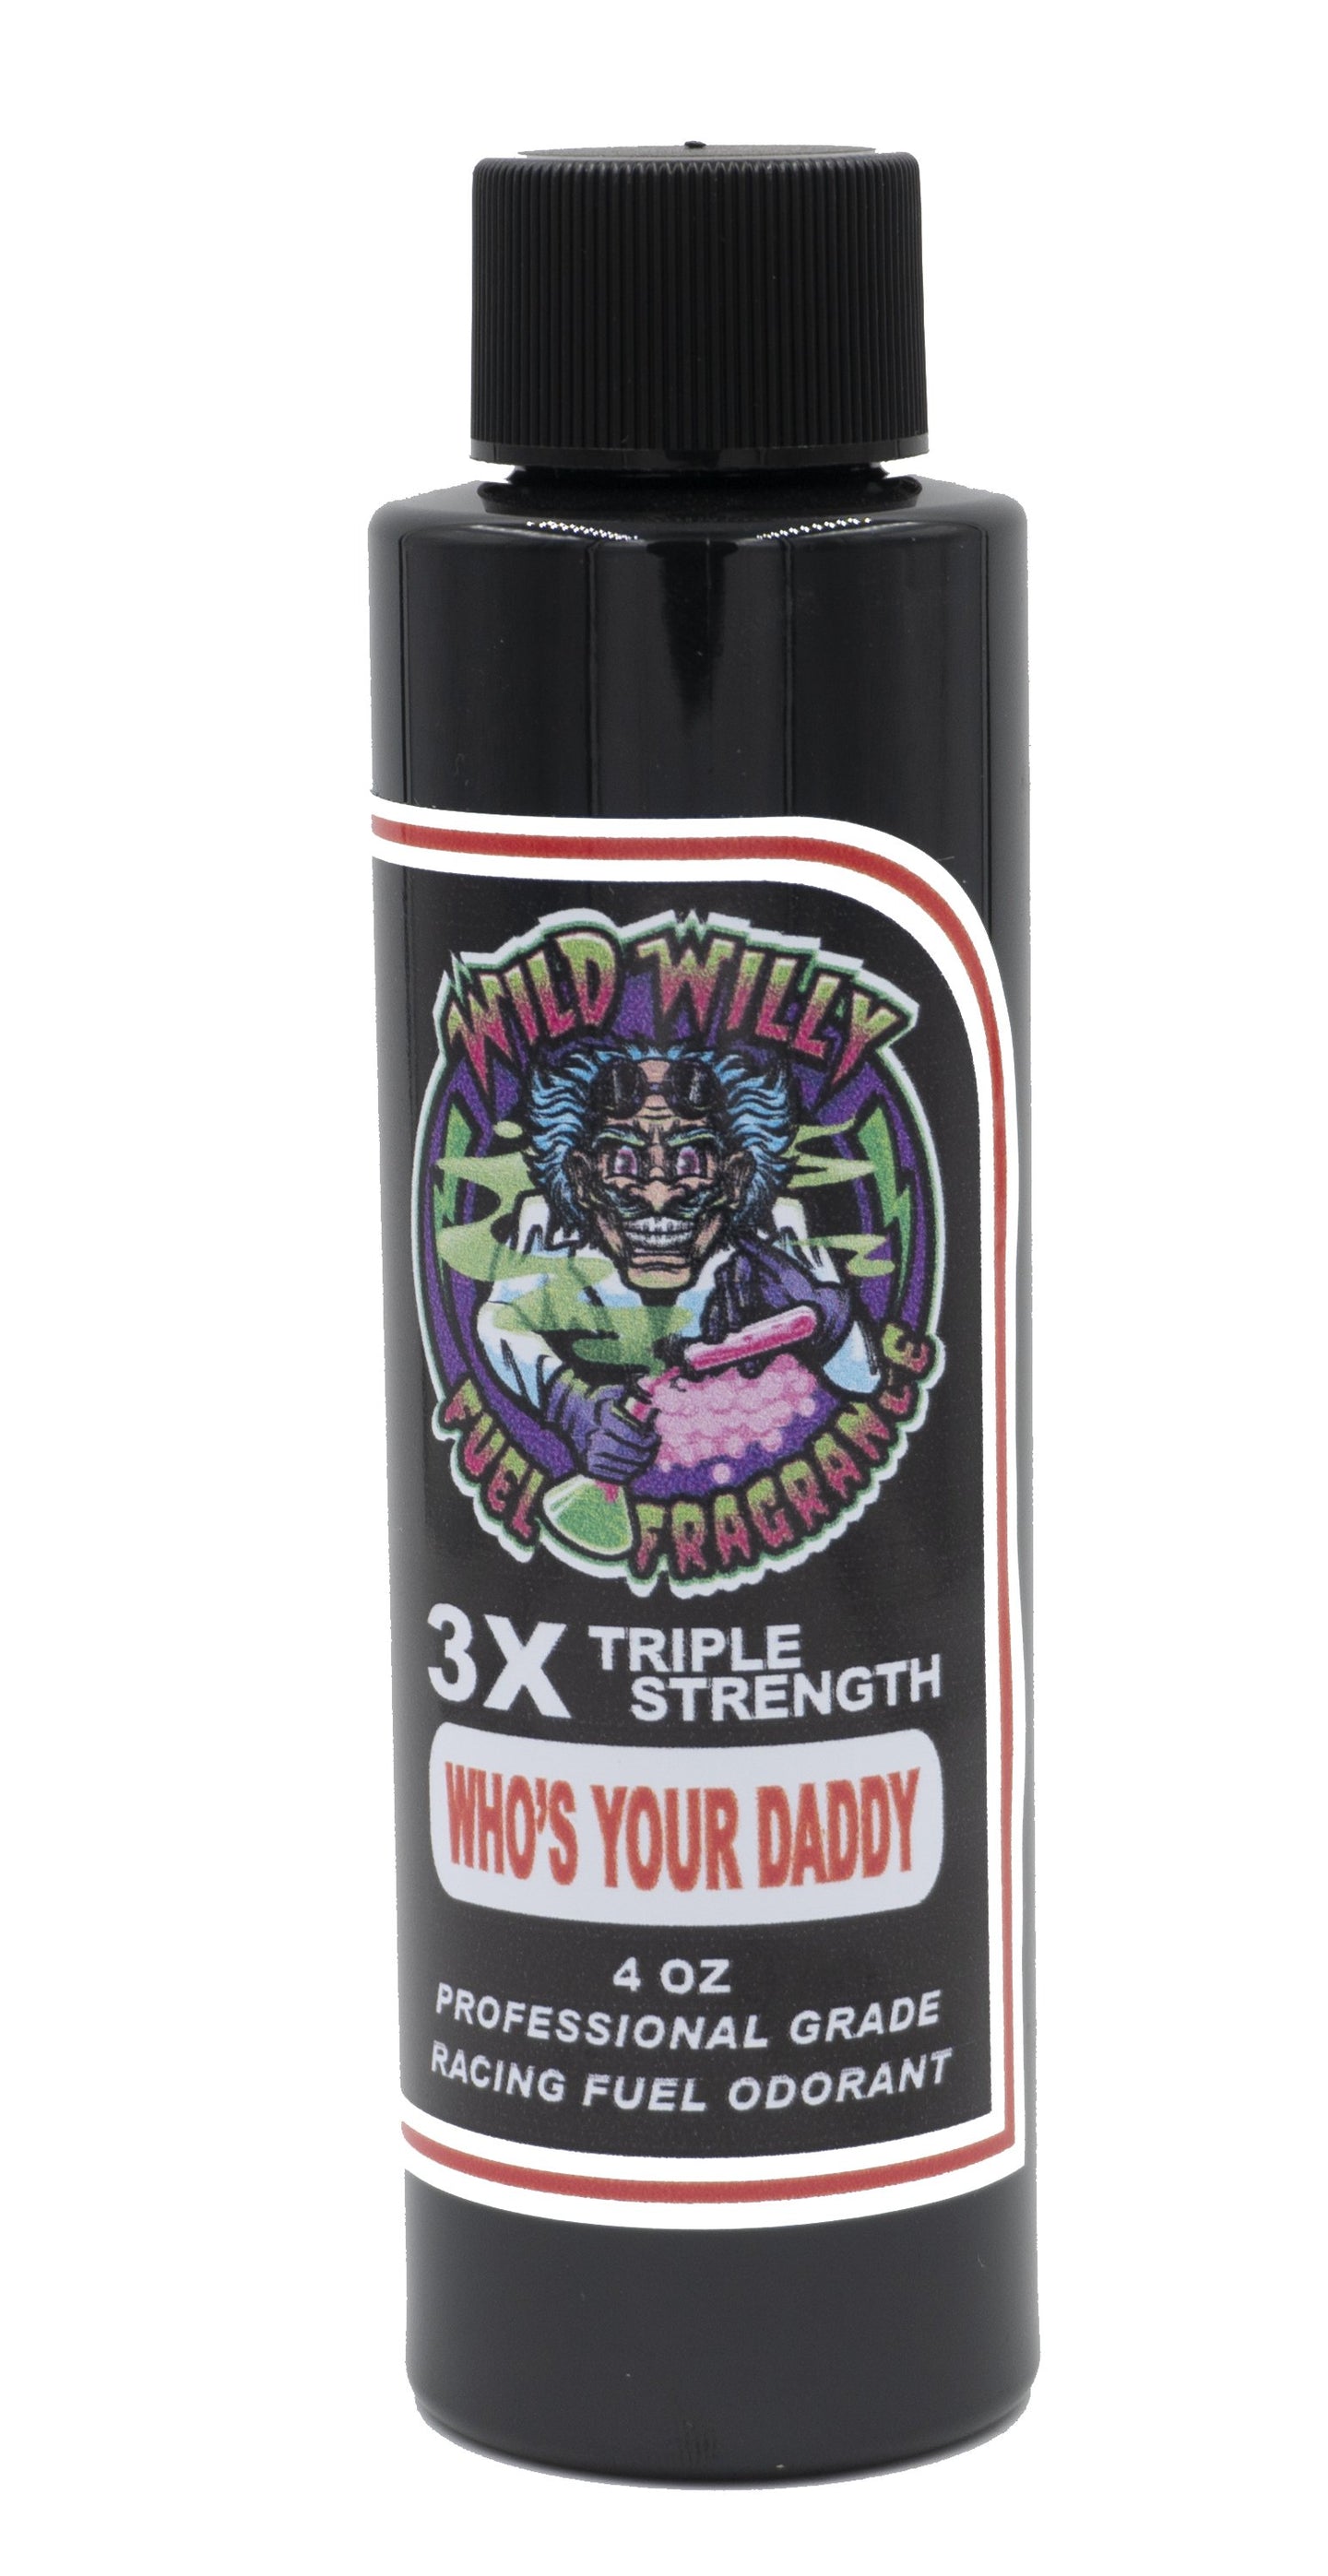 Who’s Your Daddy - Wild Willy Fuel Fragrance - 3X Triple Strength!